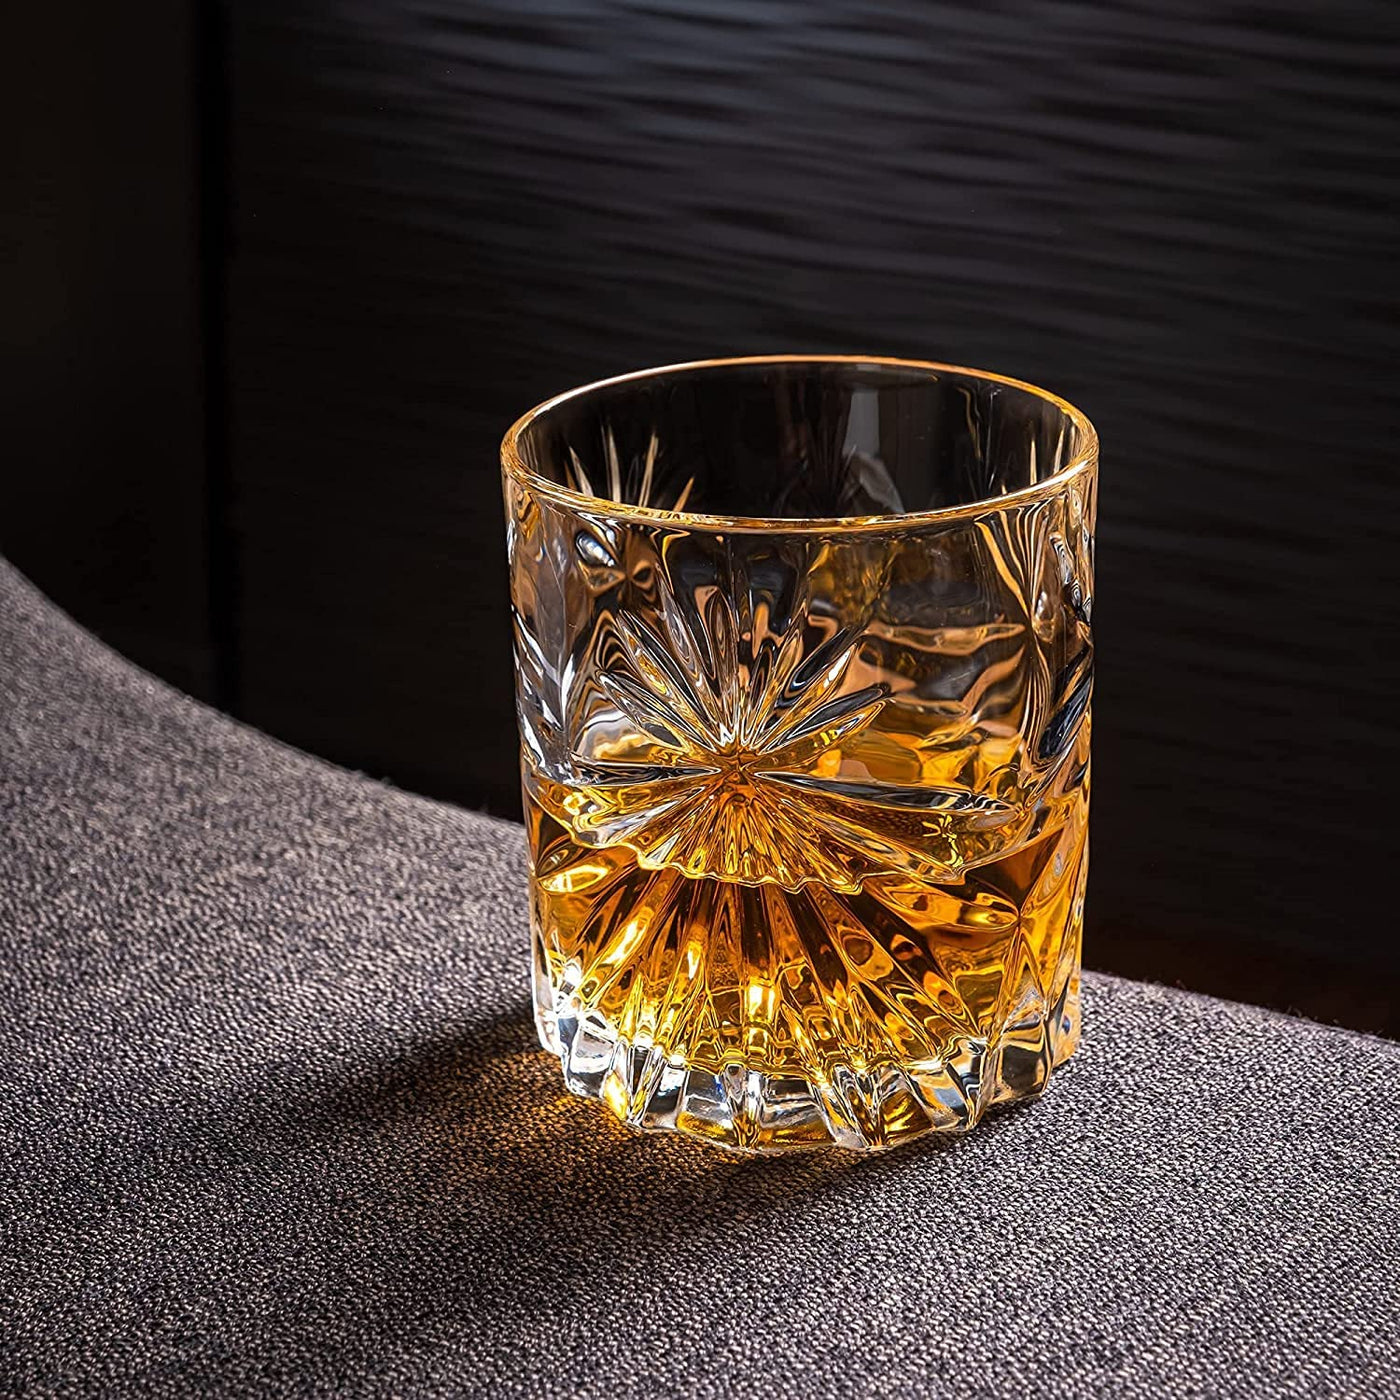 The Connoisseur's Set - Whiskey Stones & Soleil Whiskey Glass